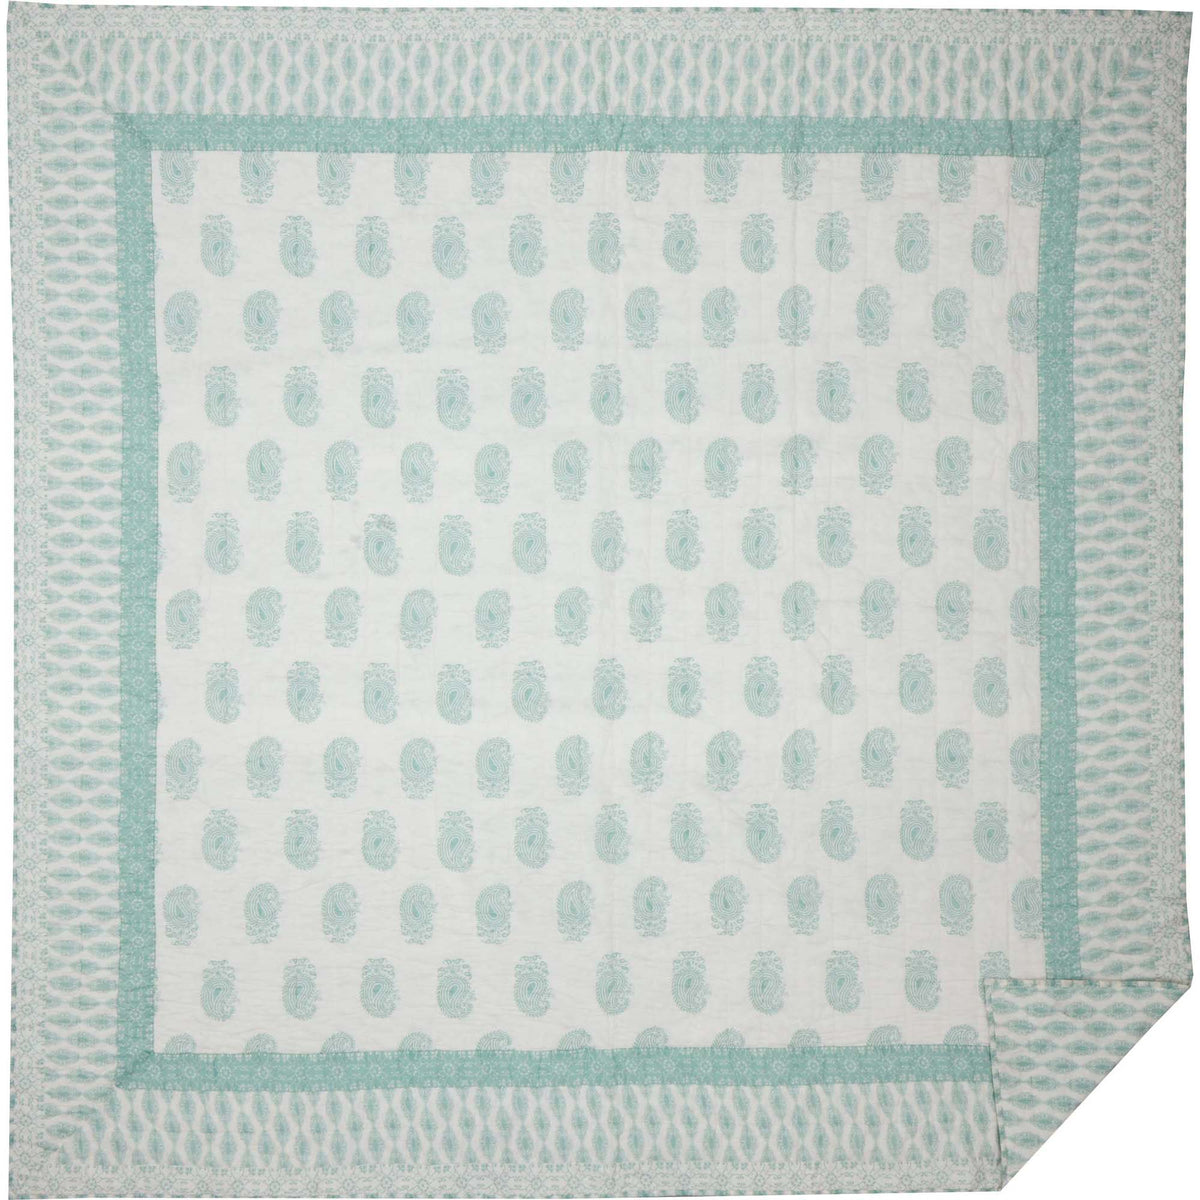 April & Olive Avani Sea Glass Queen Quilt 90Wx90L By VHC Brands